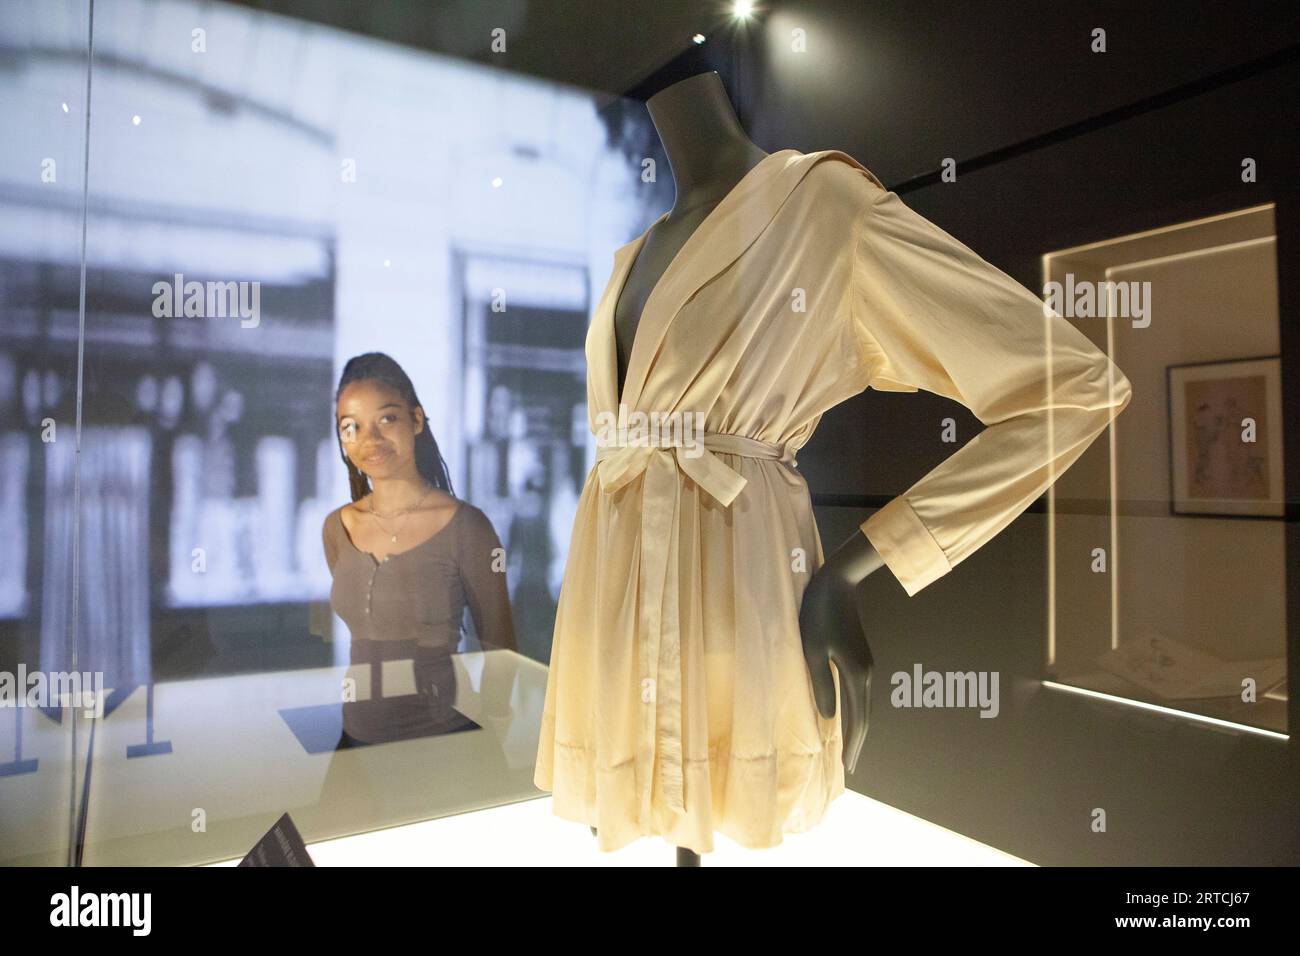 EMBARGO until 1 minute past MIDNIGHT 12 SEPT London, UK. 12th Sep, 2023. A new exhibition, 'Gabrielle Chanel: Fashion Manifesto' opens at V&A, highlighting her connections to British clients, including Queen Elizabeth II. Here a woman looks at a silk jersey Mariniere blouse from 1916, one of Coco Chanel's earliest designs. Credit: Anna Watson/Alamy Live News Stock Photo